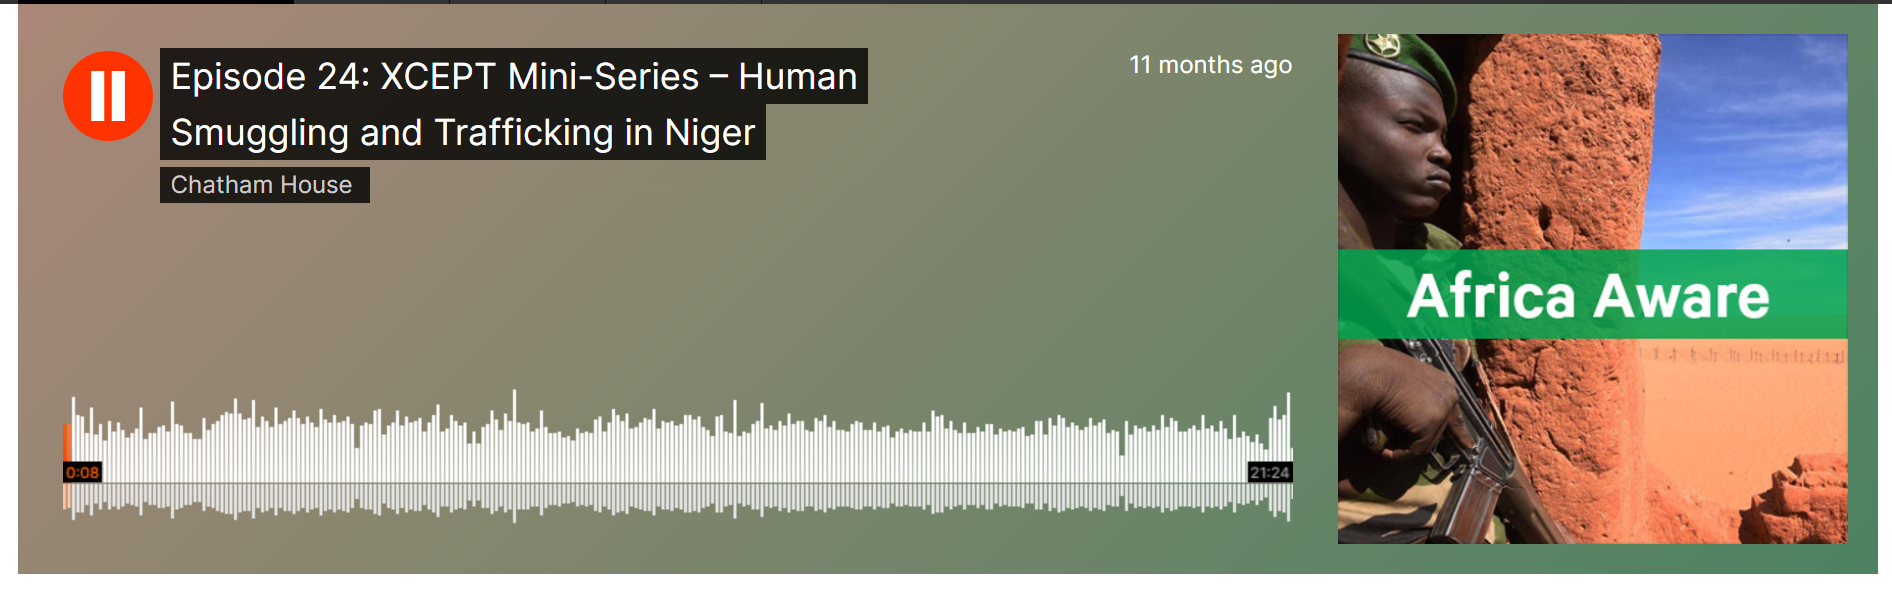 Miniature Africa Aware: Human smuggling and trafficking in Niger